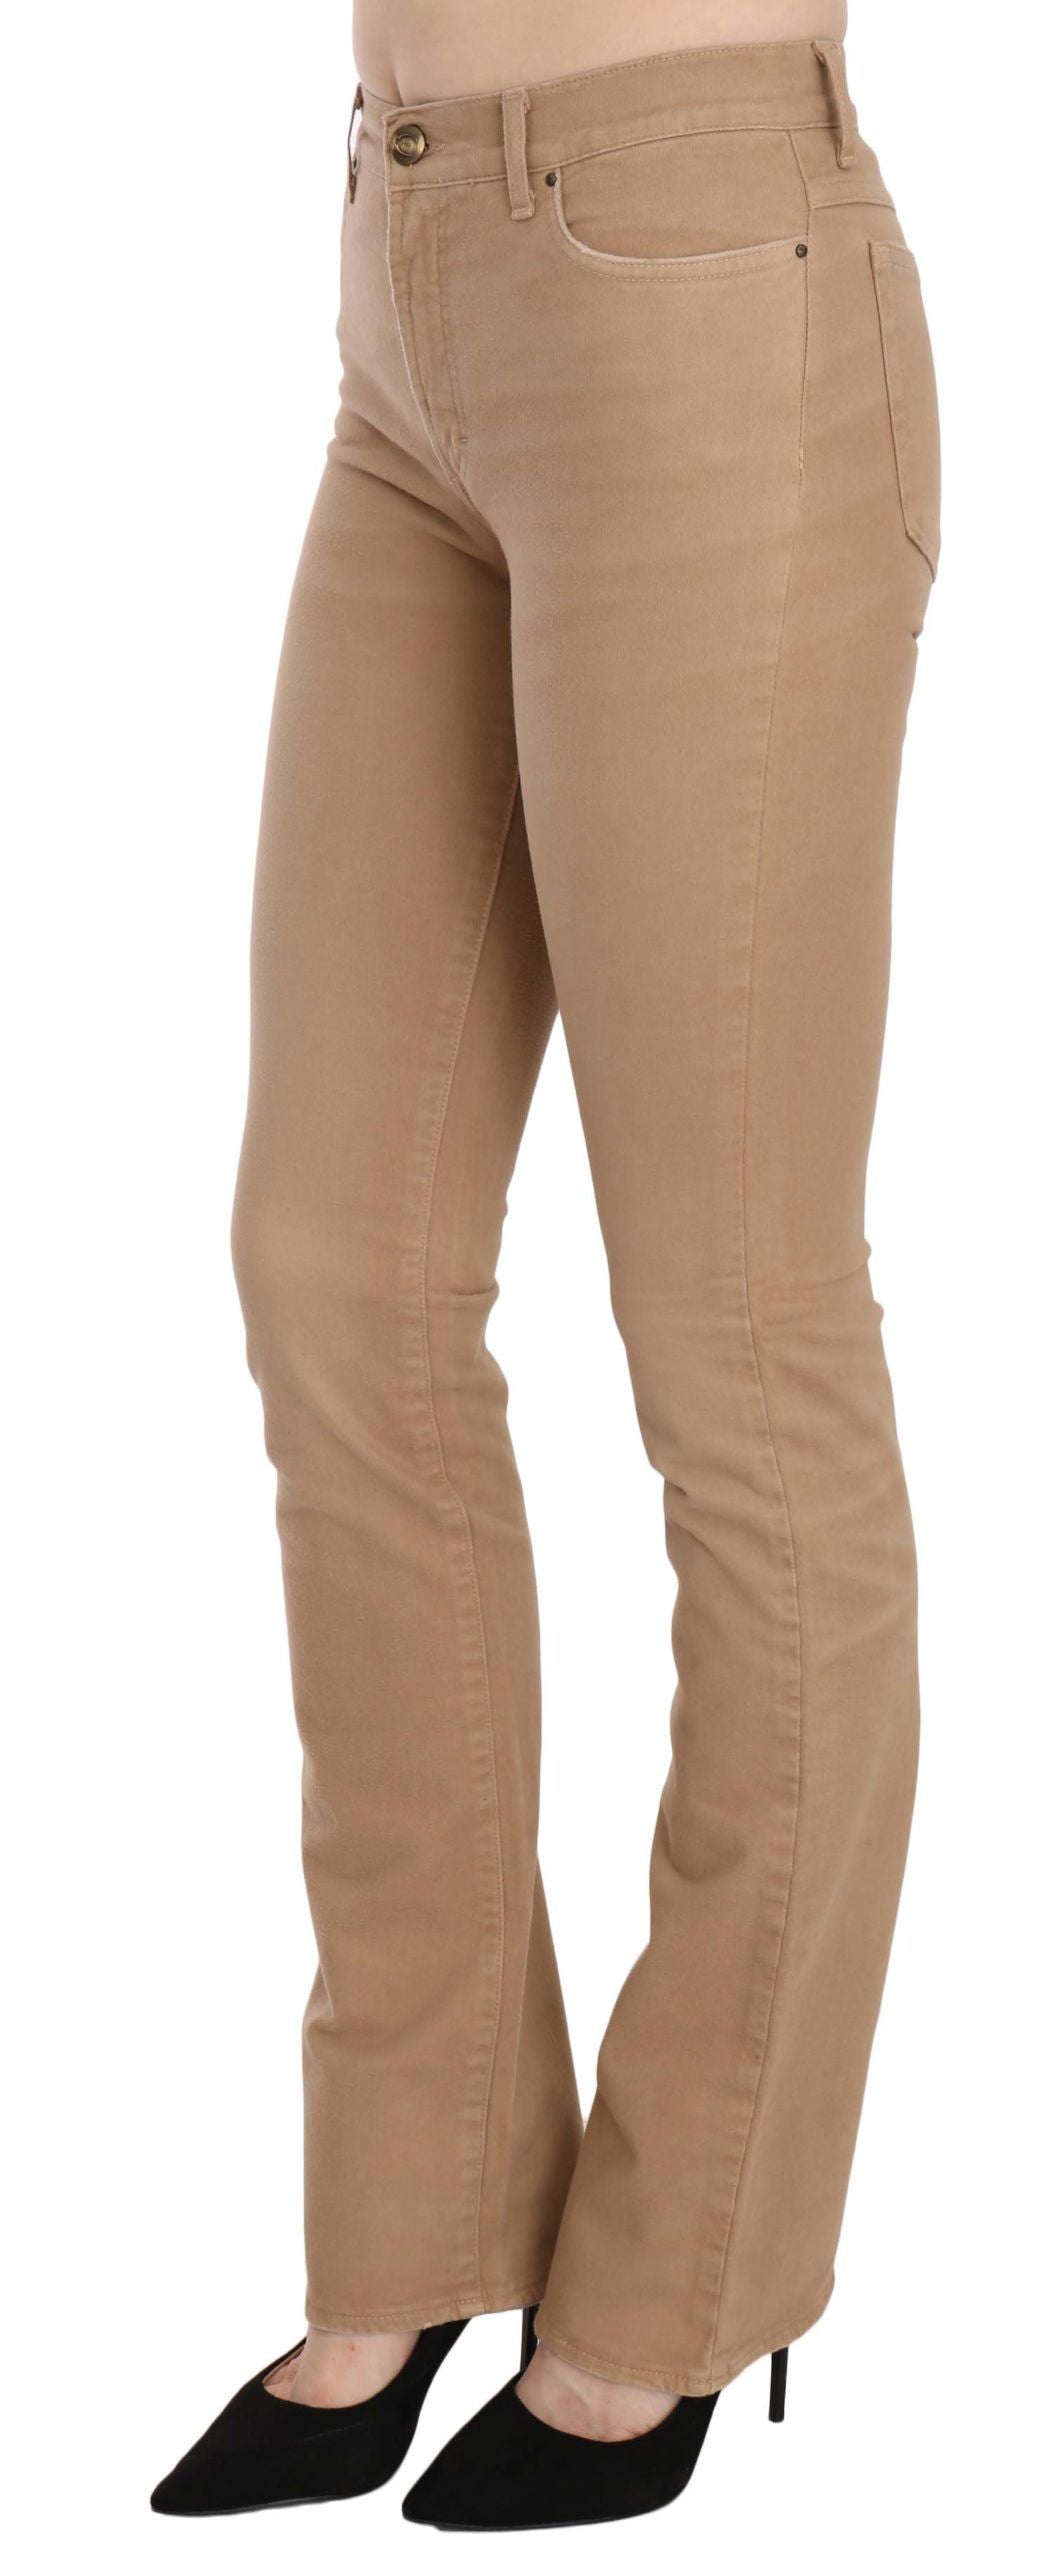 Just Cavalli Brown Cotton Stretch Mid Waist Skinny Trousers Pants